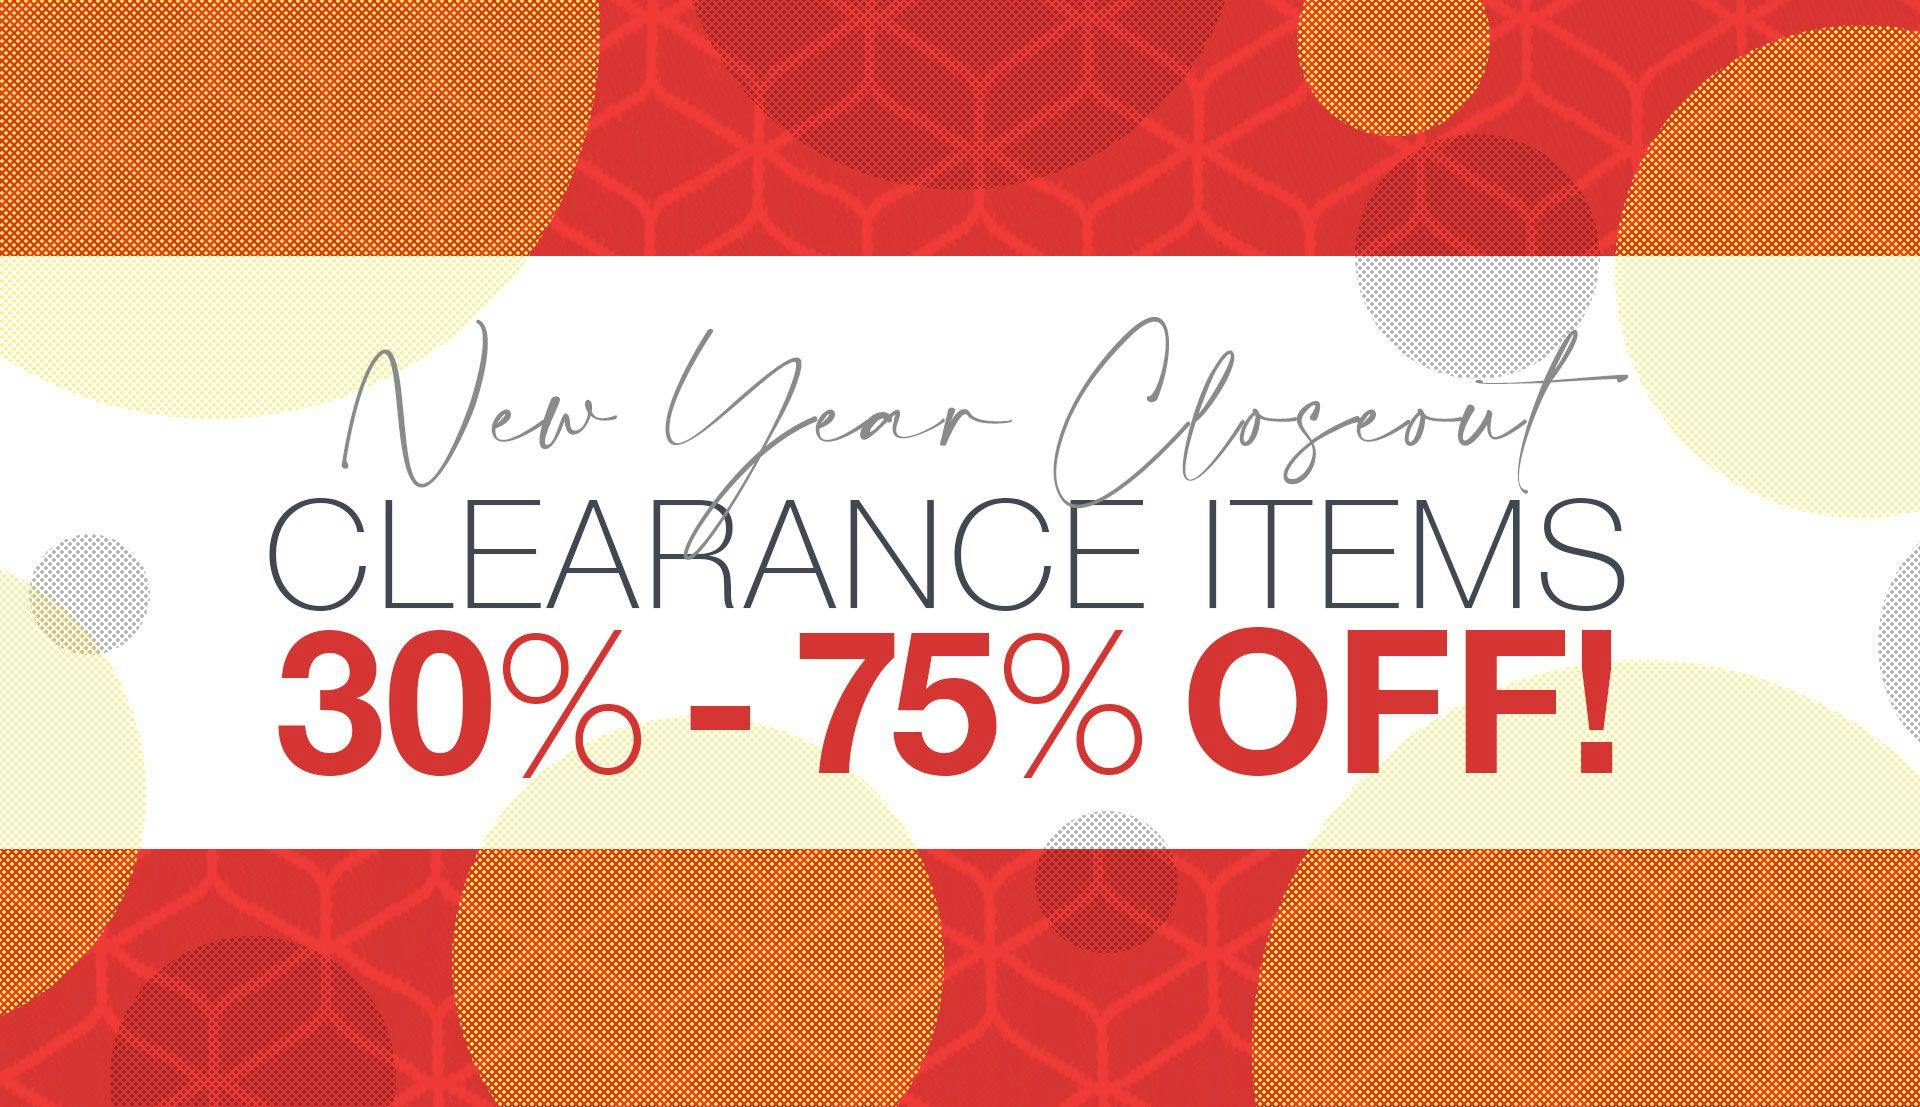 30% - 75% off Clearance